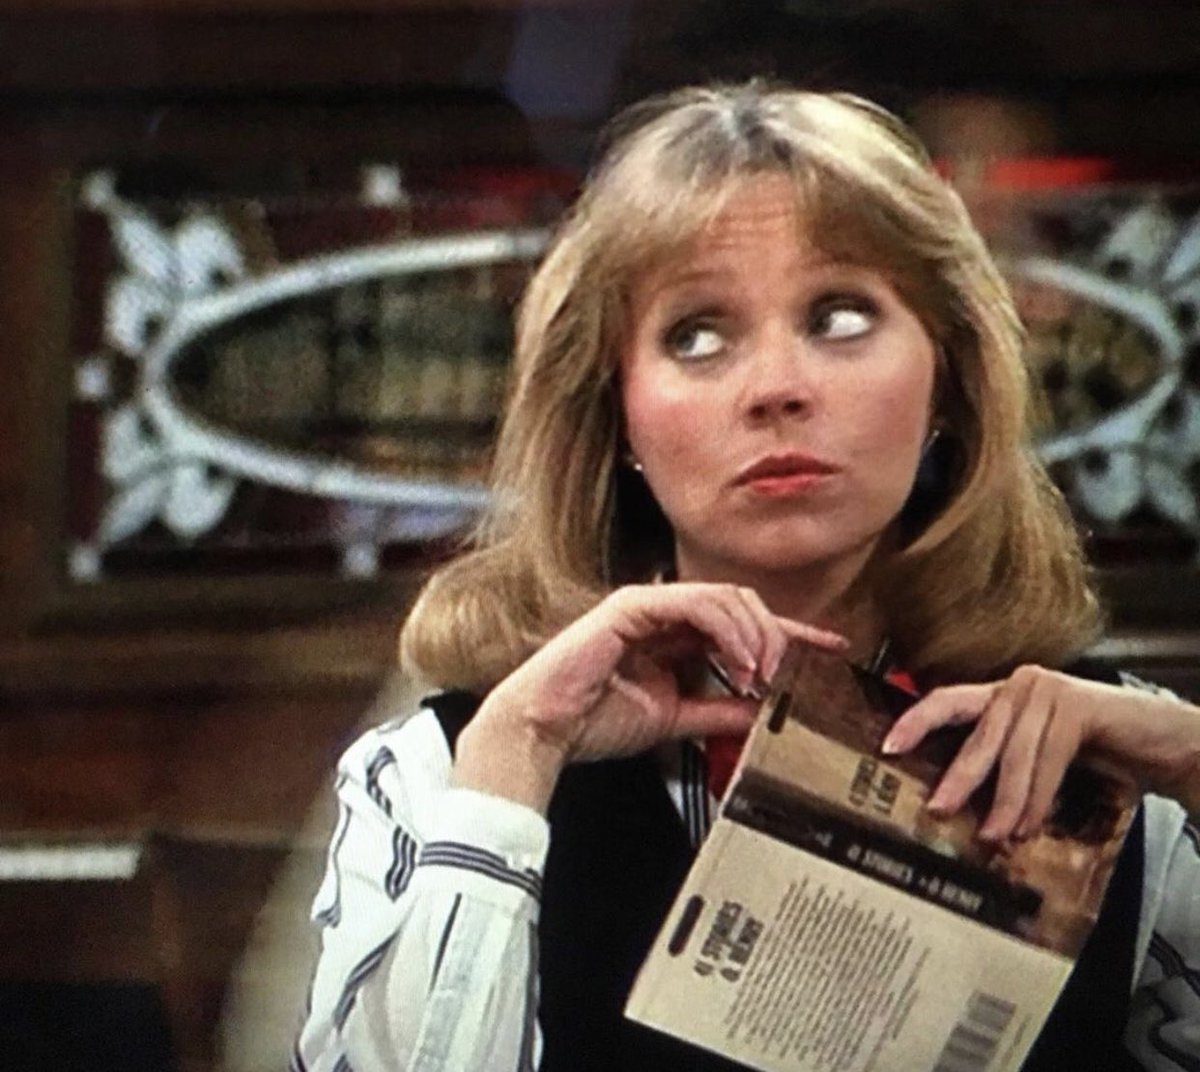 𝓒𝓱𝓮𝓮𝓻𝓼 𝓪𝓼 𝓛𝓲𝓽𝓮𝓻𝓪𝓻𝔂 𝓒𝓵𝓪𝓼𝓼𝓲𝓬𝓼In an ode to resident bar bookworm Diane Chambers here is an amusing ode to great literary works via Cheers.